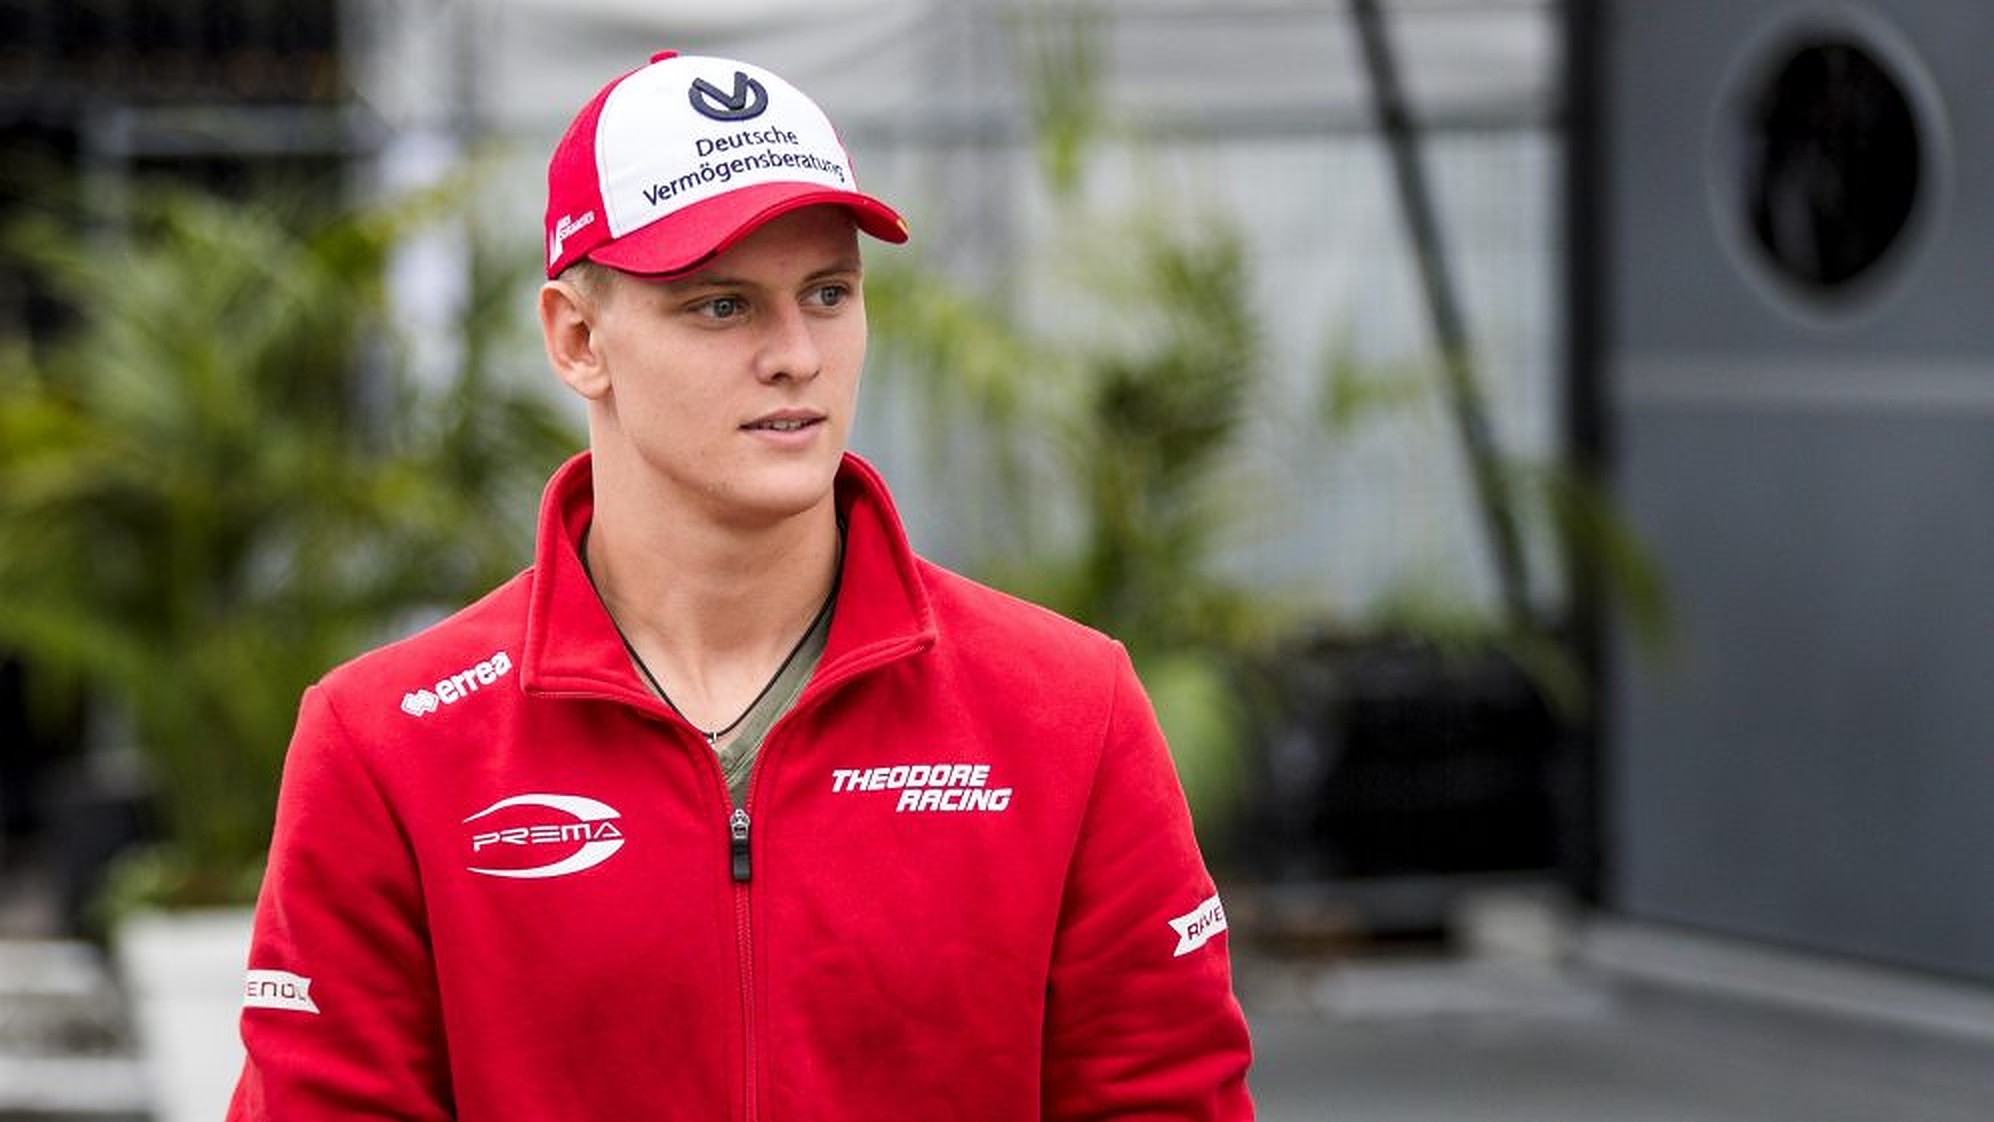 Haas to sign Schumacher and Mazepin for 2021